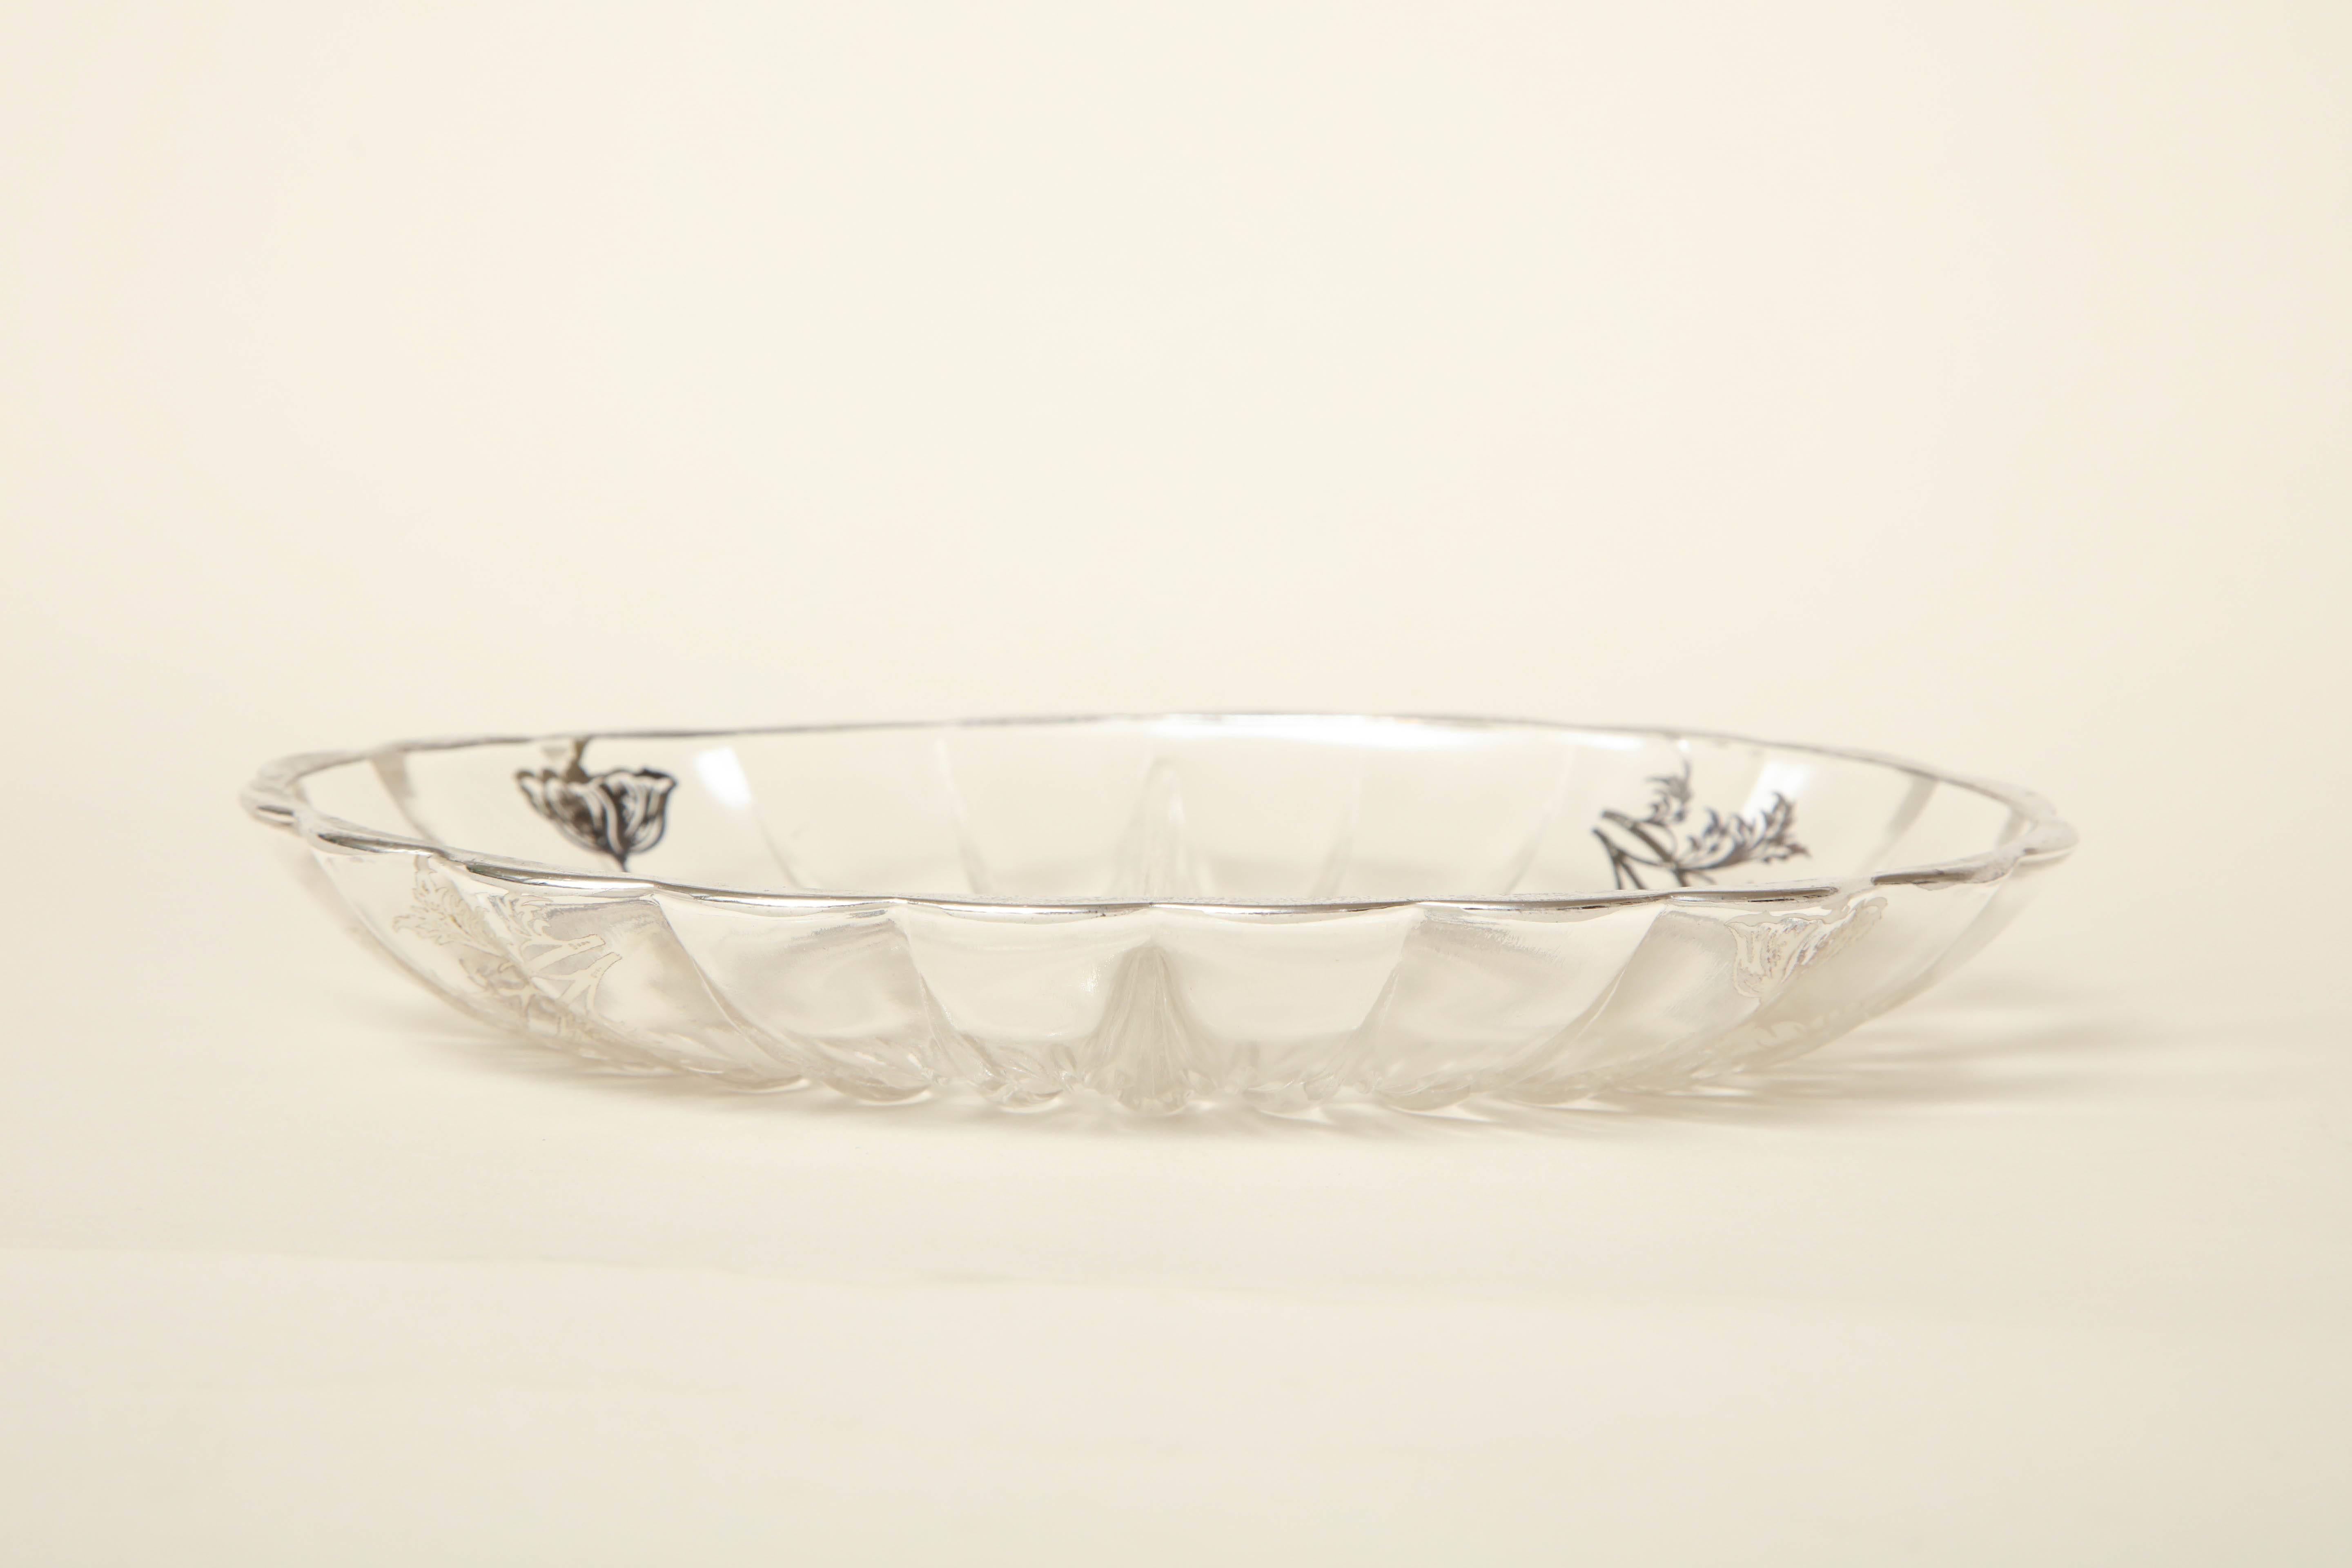 20th Century American Art Deco Glass Candy/Nut Dish For Sale